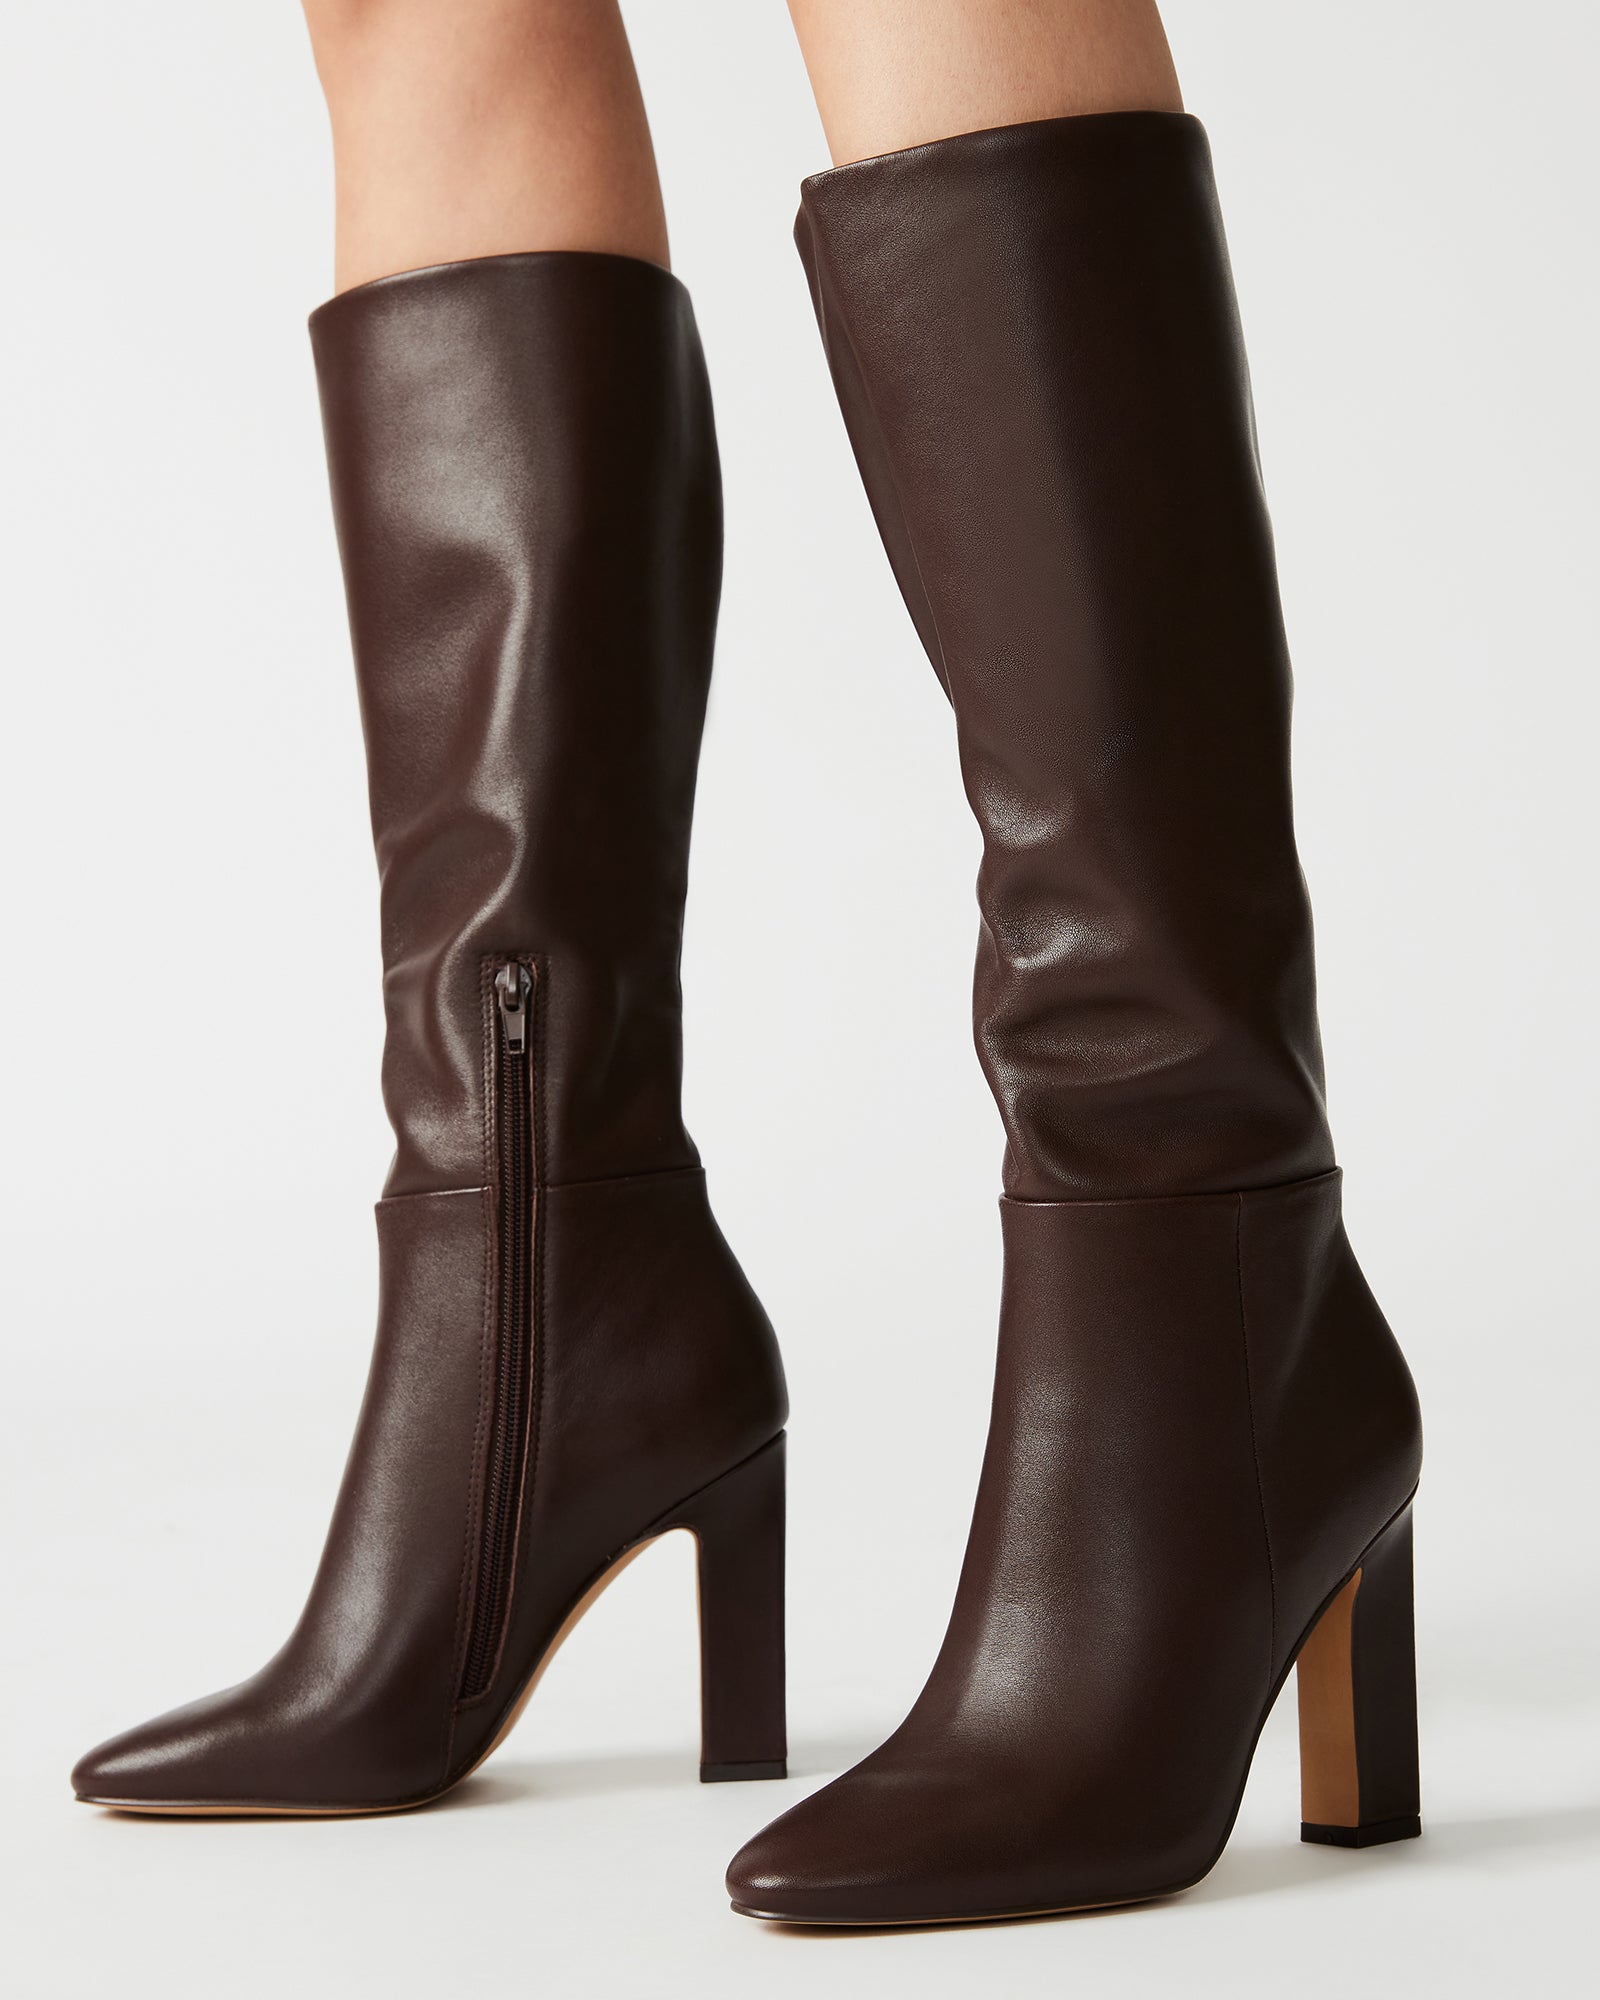 ARCHERS Brown Leather Knee High Boot | Women's Boots – Steve Madden